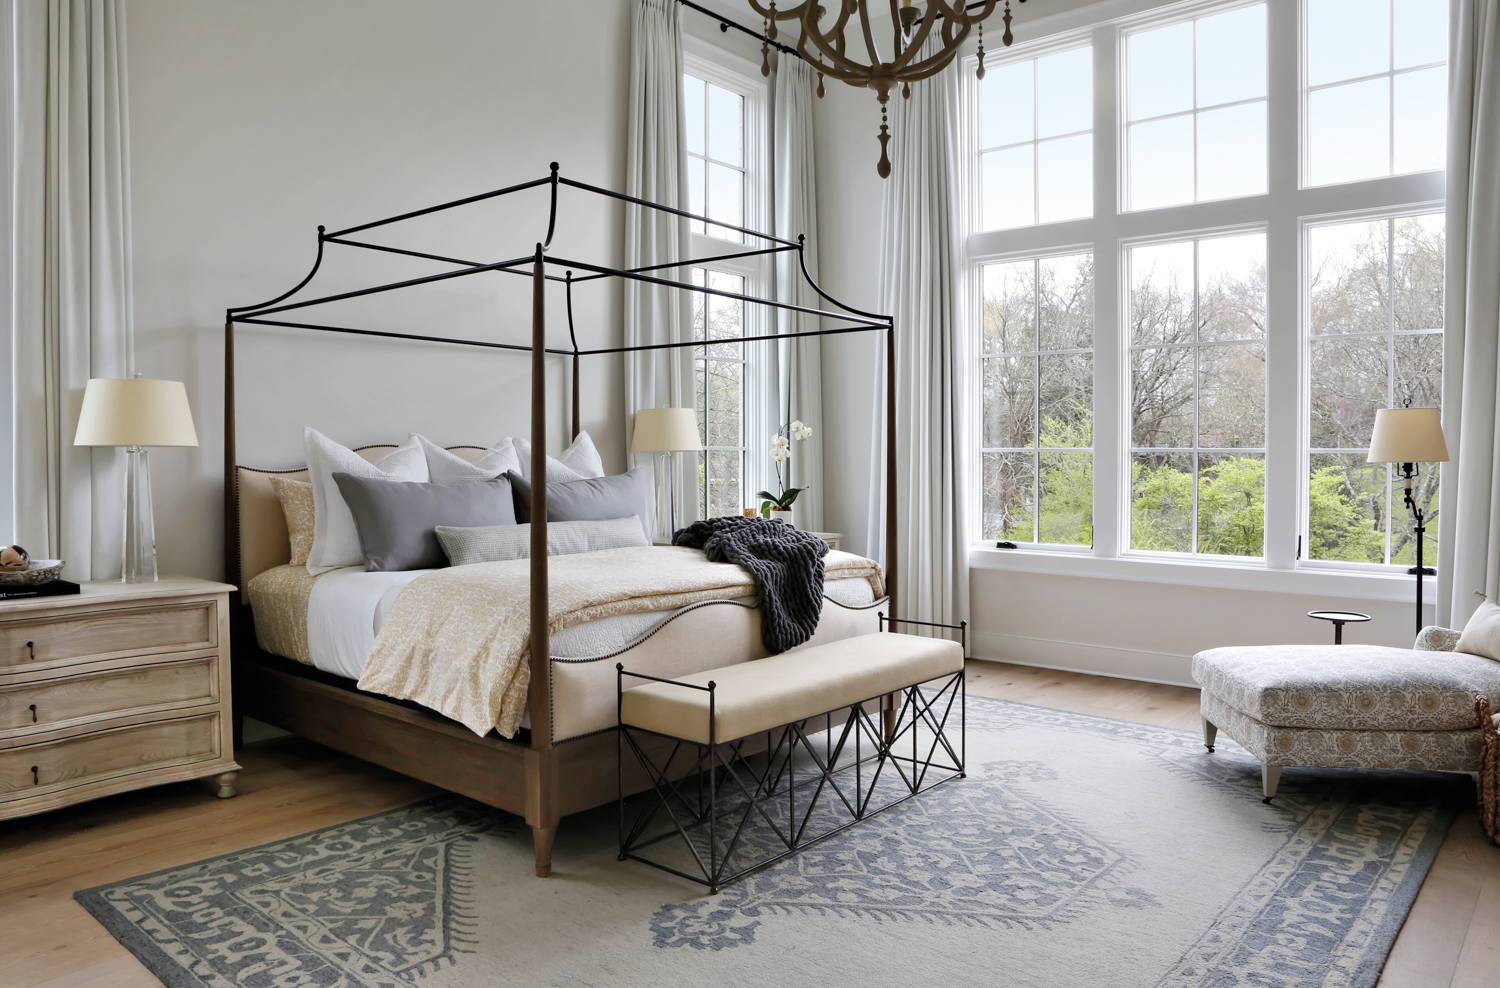 Large, light gray bedroom with canopy bed and tall windows